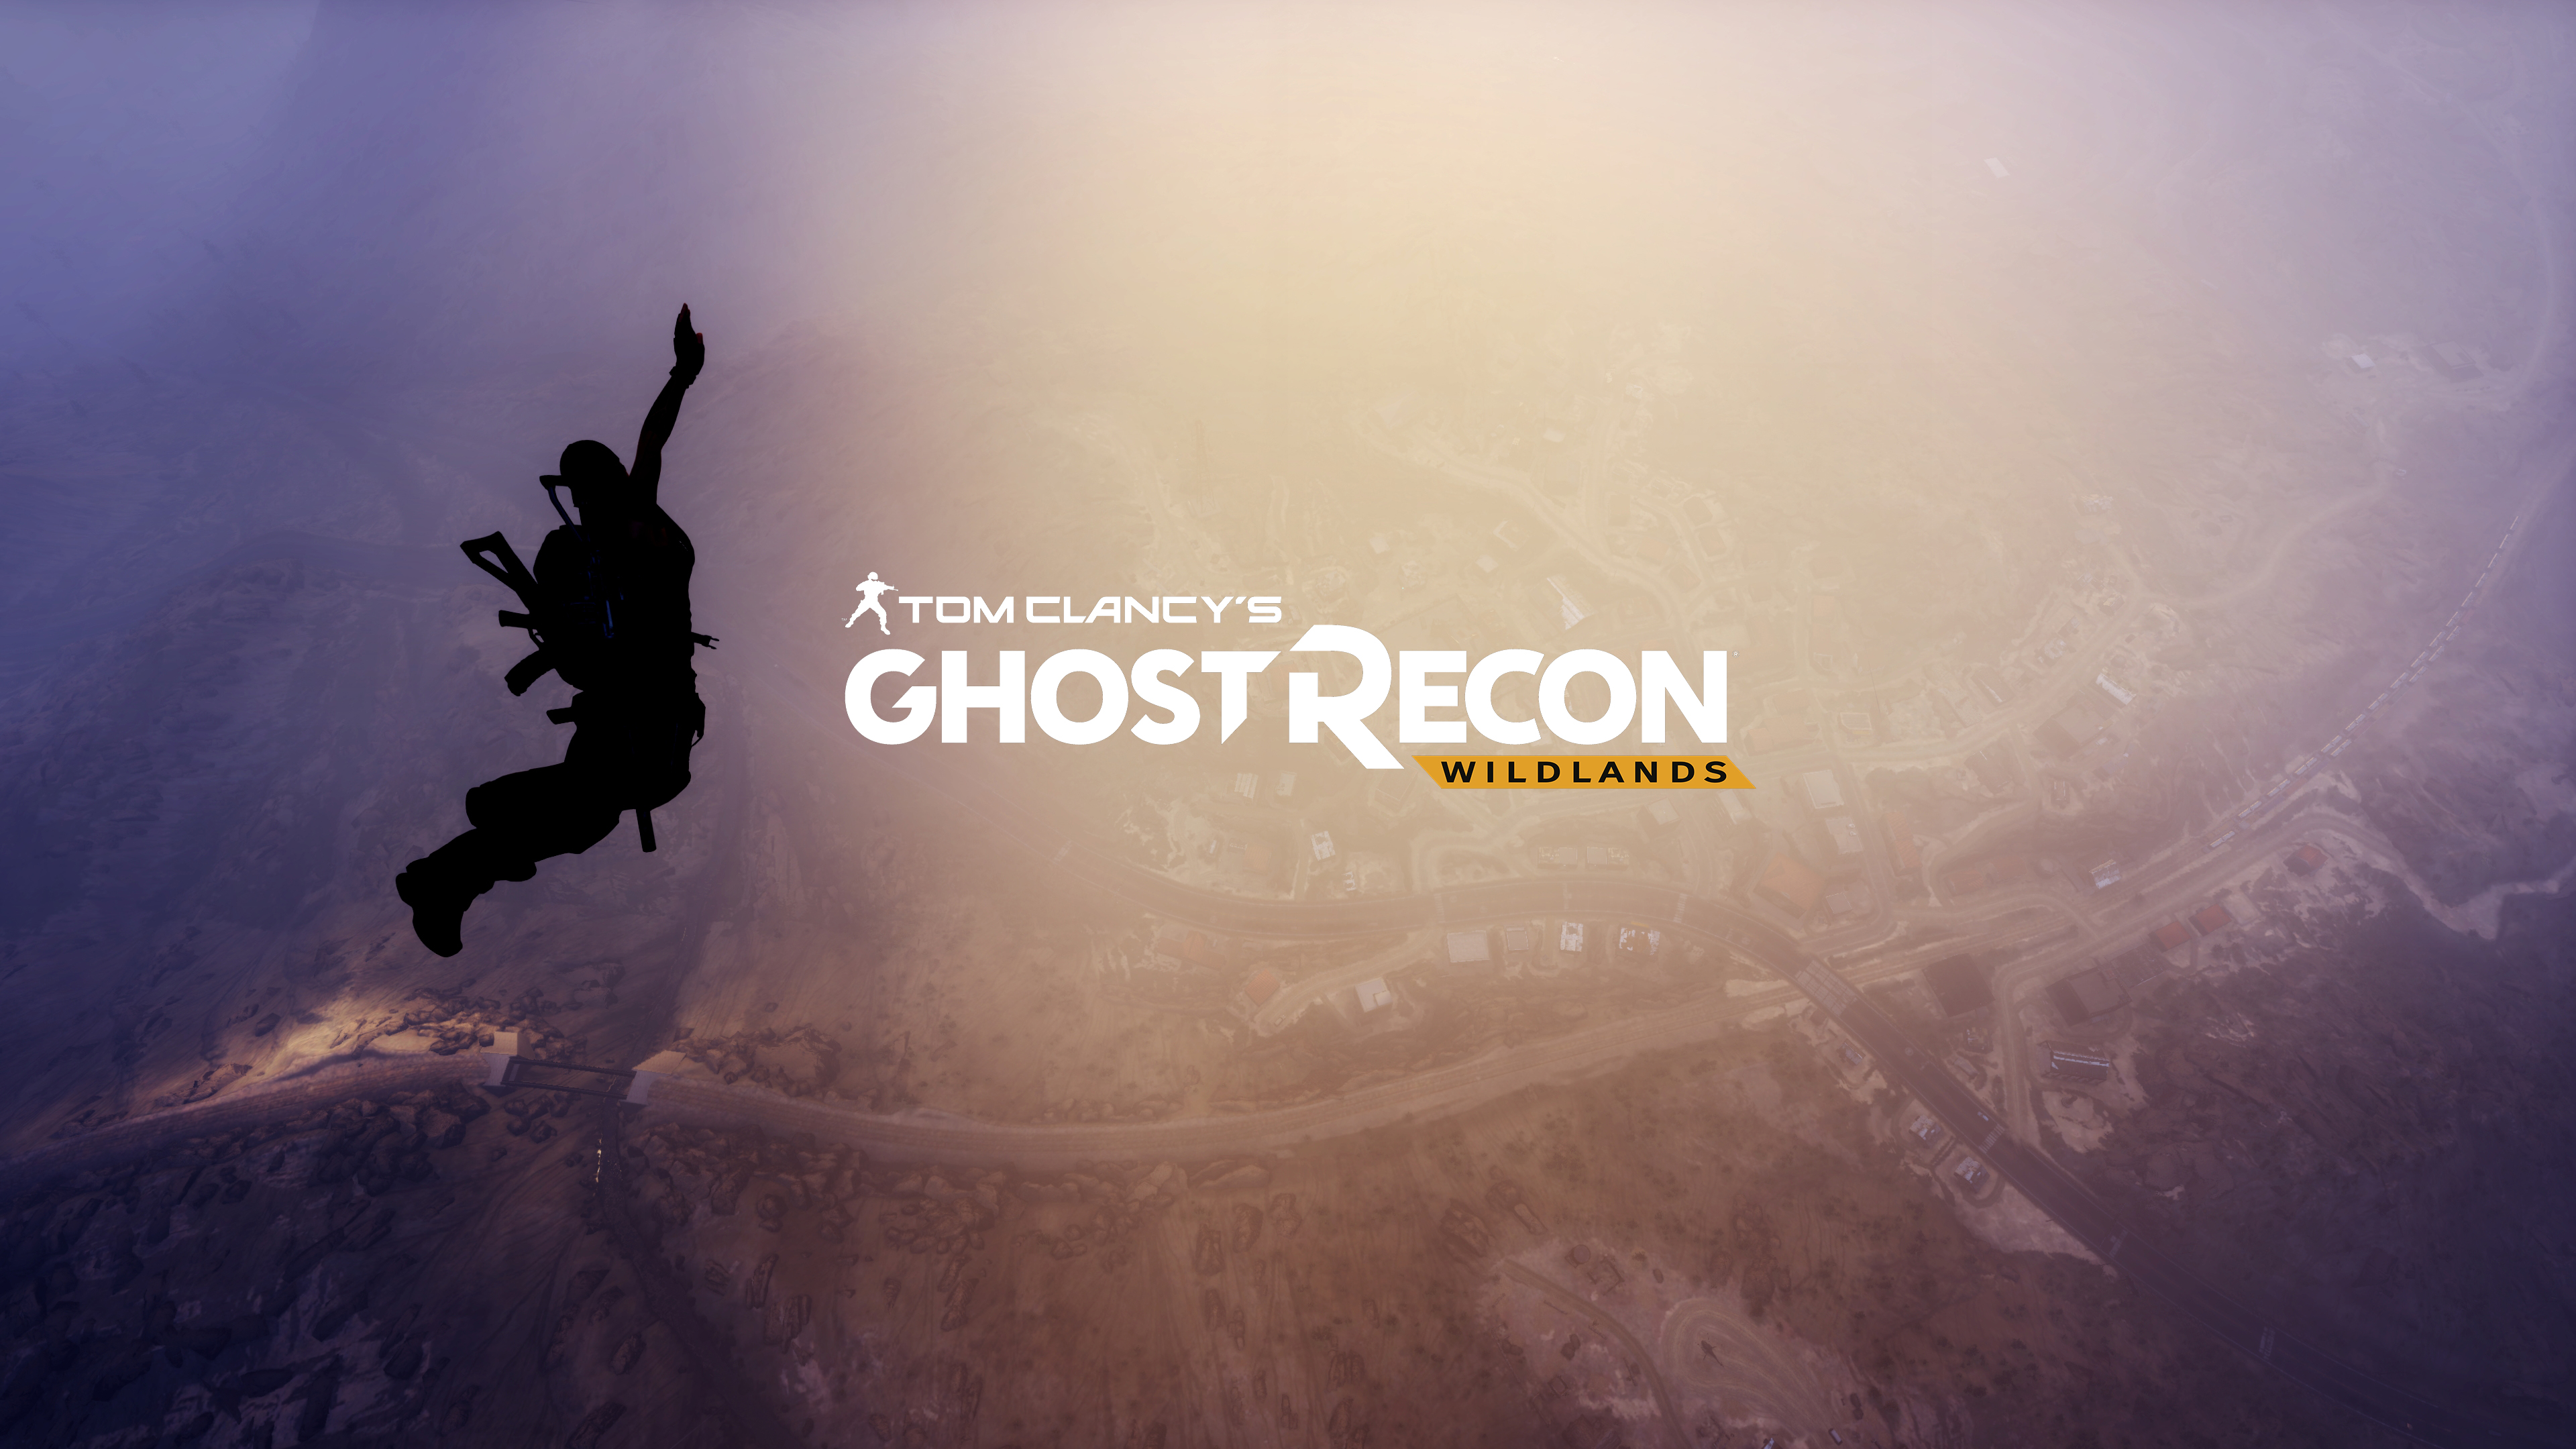 Wallpapers Tom Clancys Ghost Recon Wildlands 2016 games Xbox games on the desktop